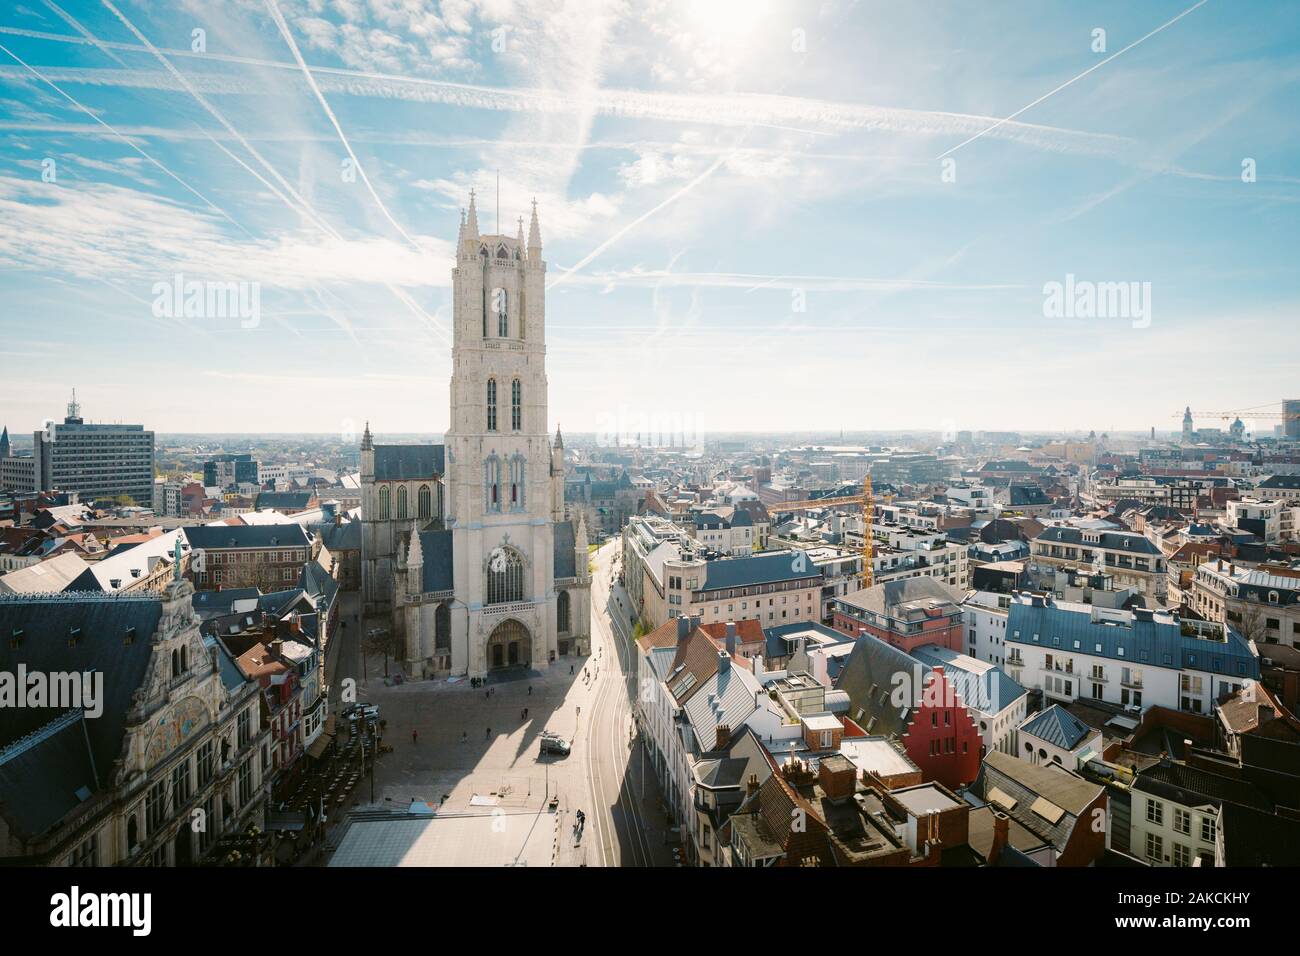 Aerial view of Ghent city center with famous Sint-Baafskathedraal on a sunny day, Flanders region, Belgium Stock Photo